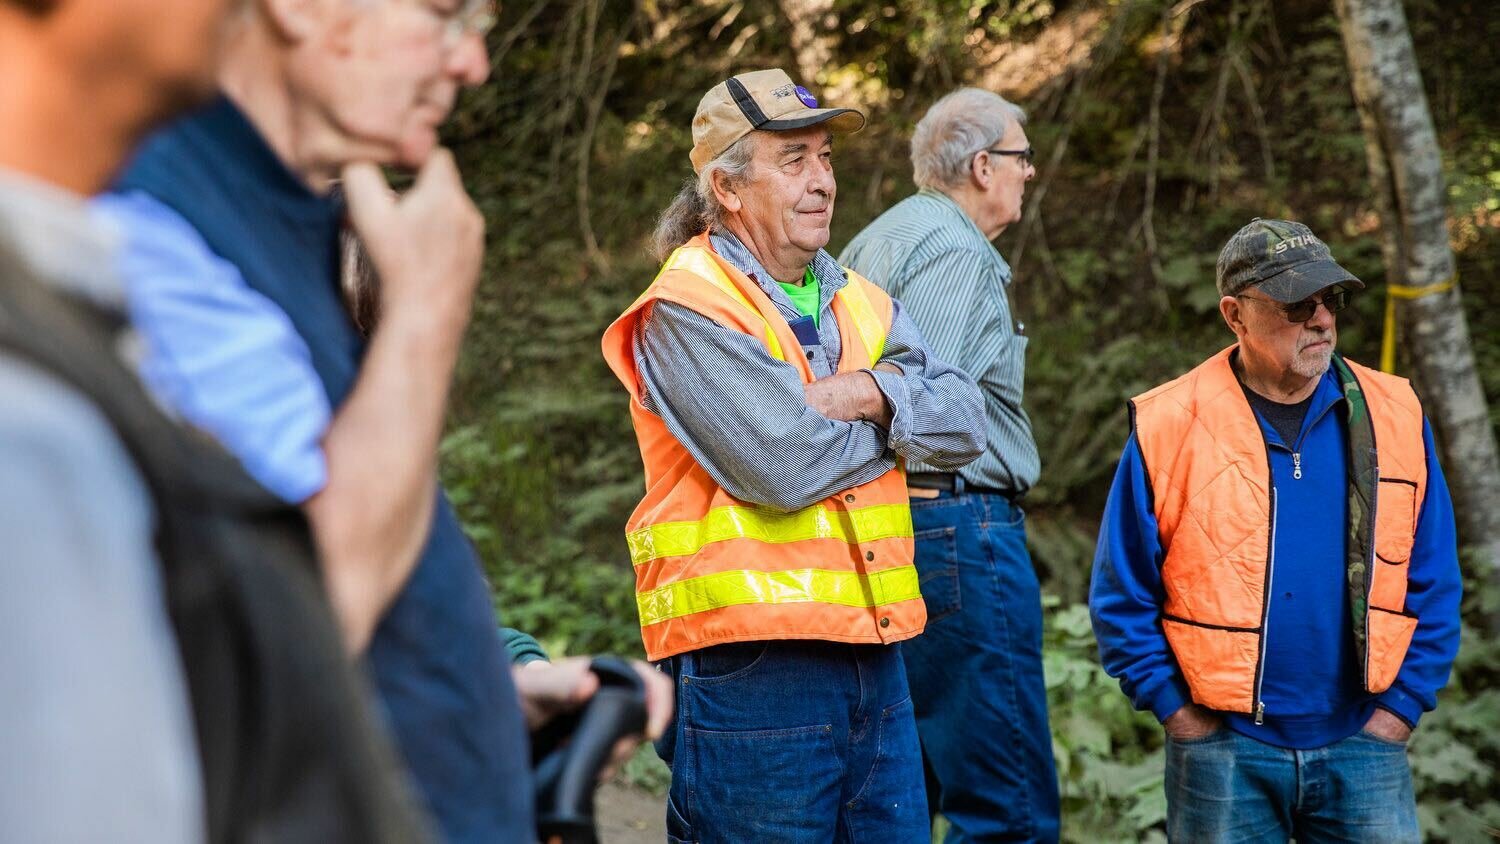 Pete Krabbe crosses his arms and smiles during a Pinchot Partners event in the Gifford Pinchot National Forest last year. Krabbe died in a motorcycle crash on state Route 508 west of Morton Thursday.